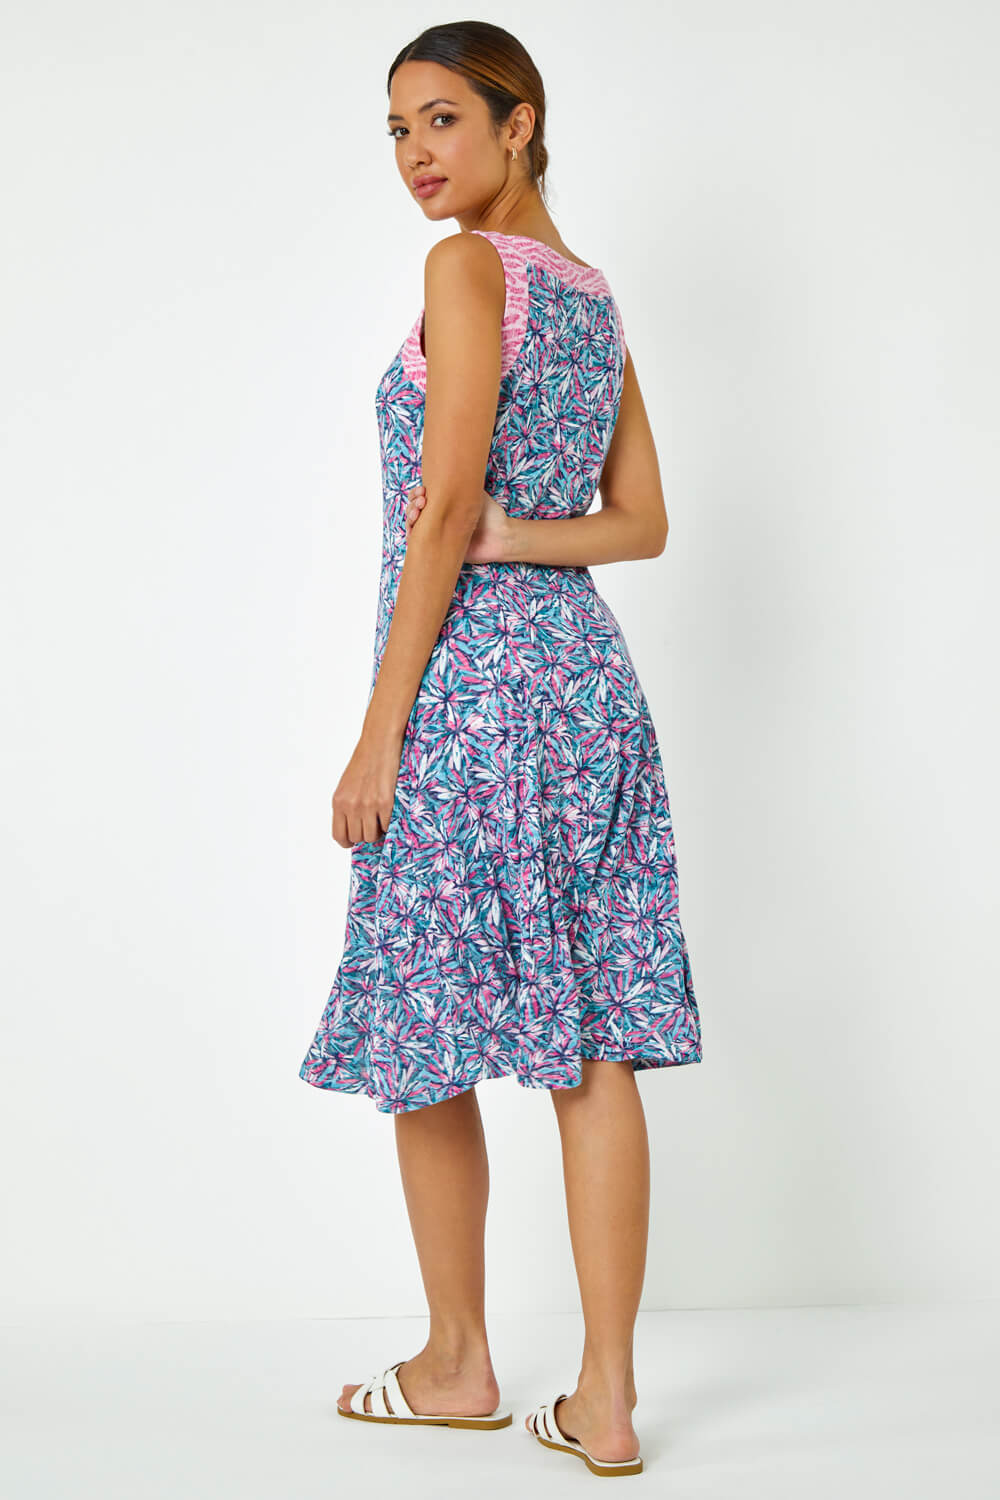 PINK Sleeveless Contrast Floral Print Dress, Image 3 of 5